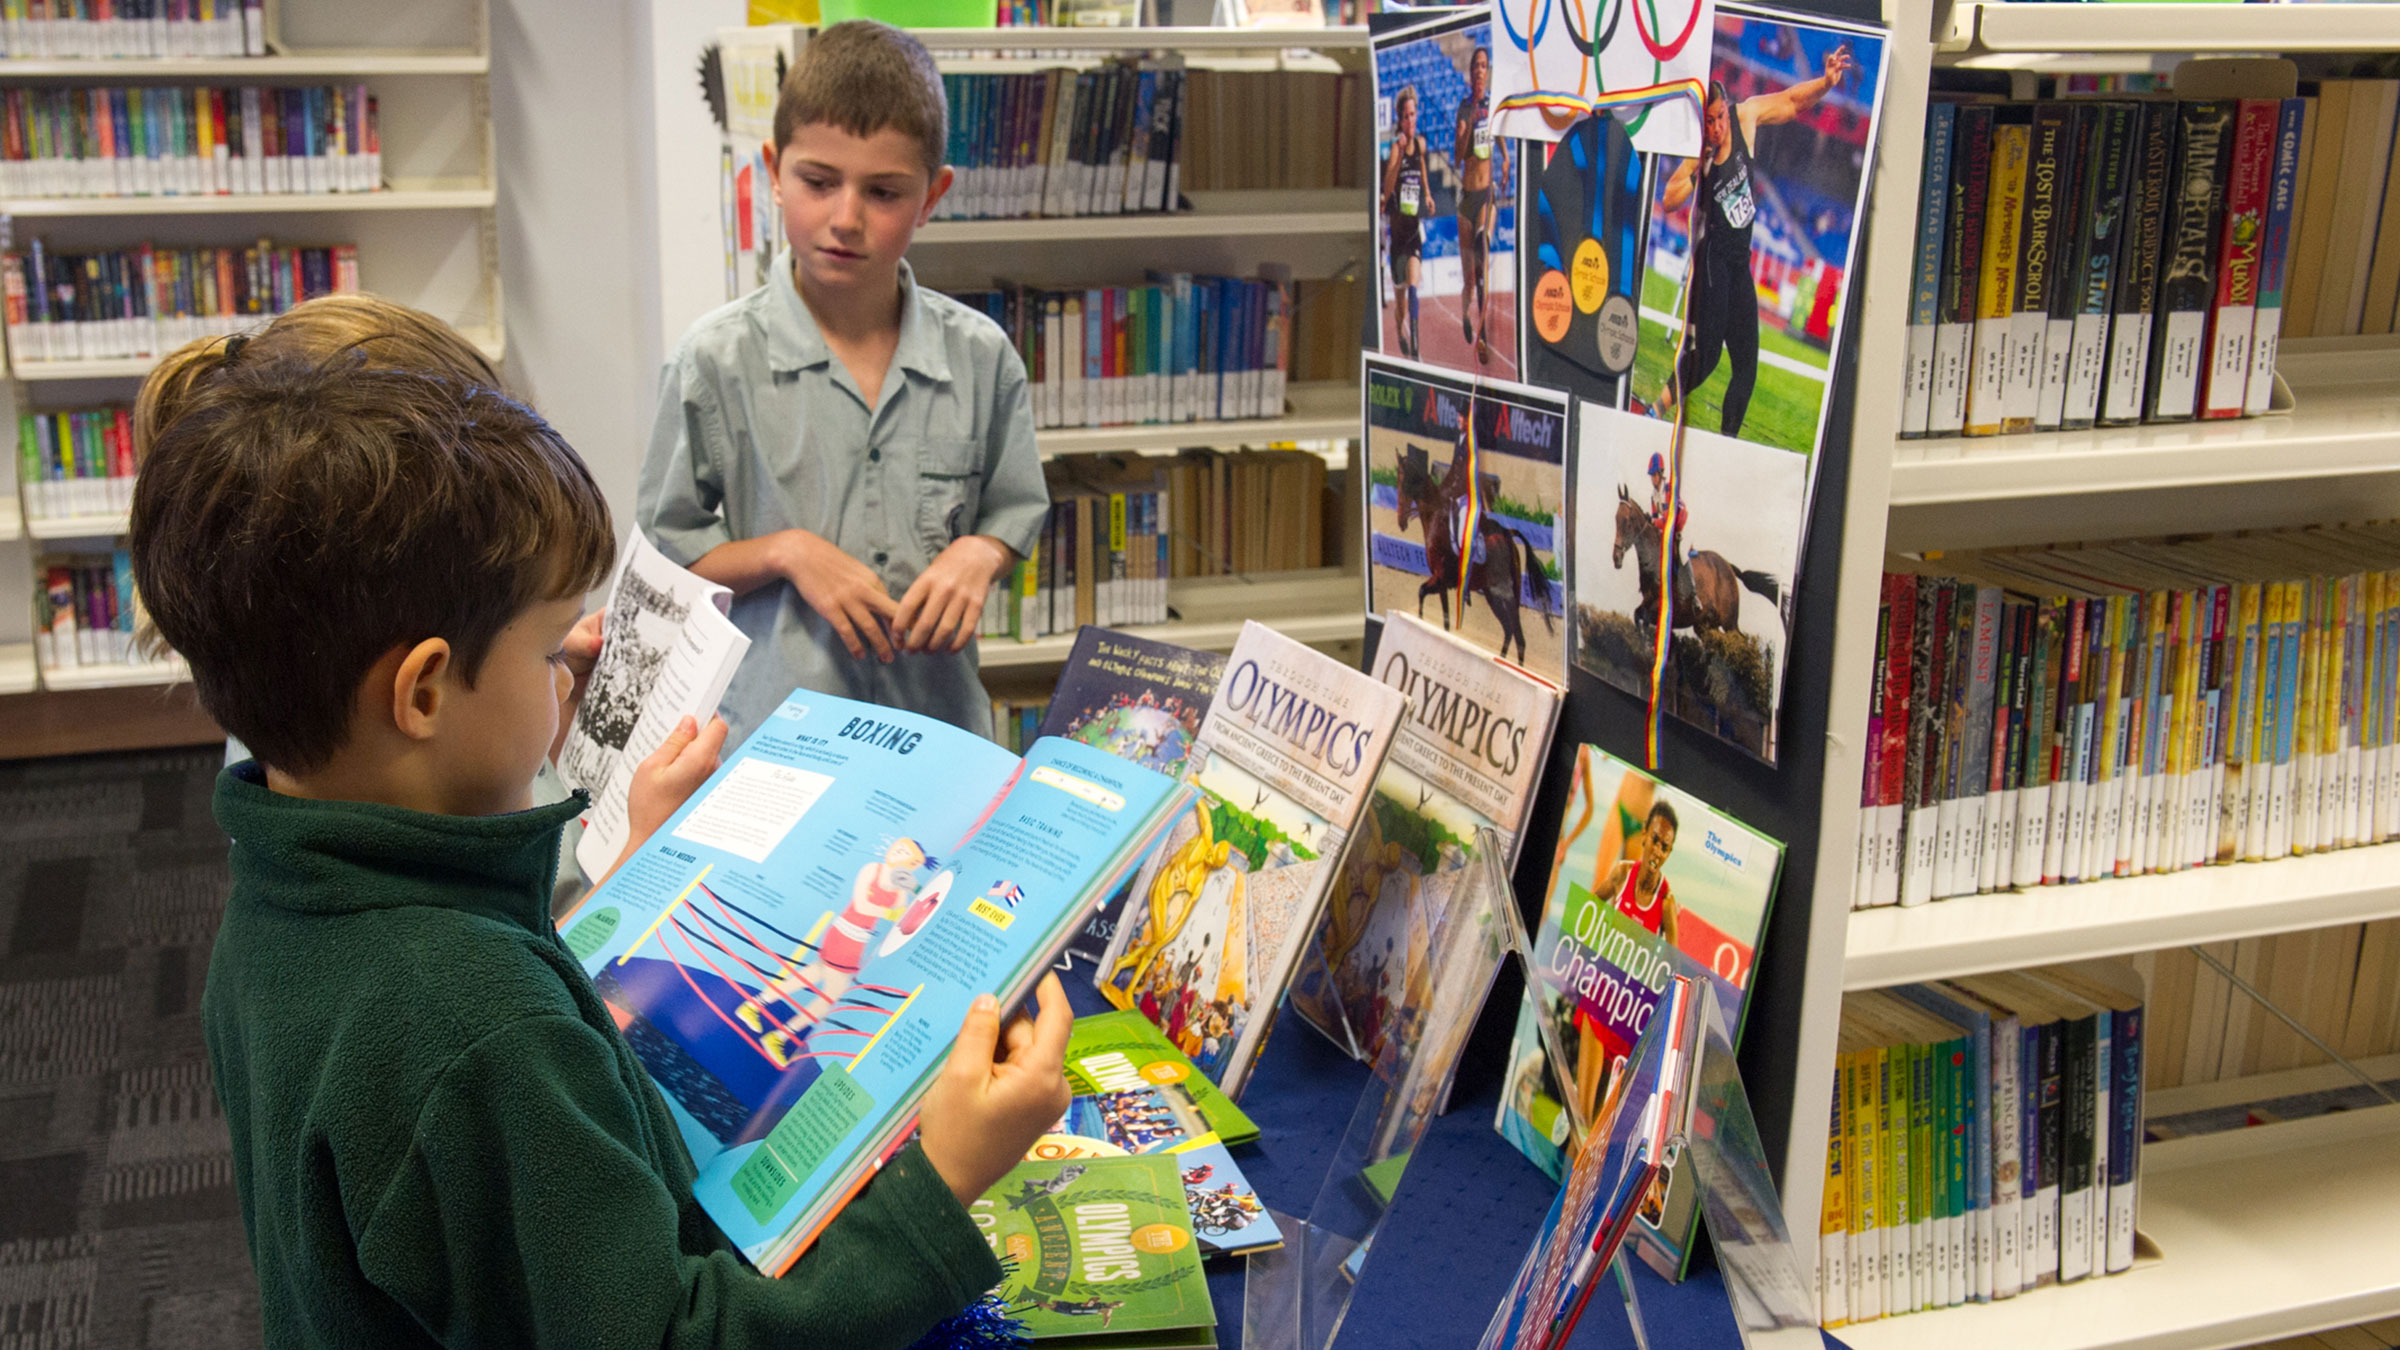 Students reading in the school library